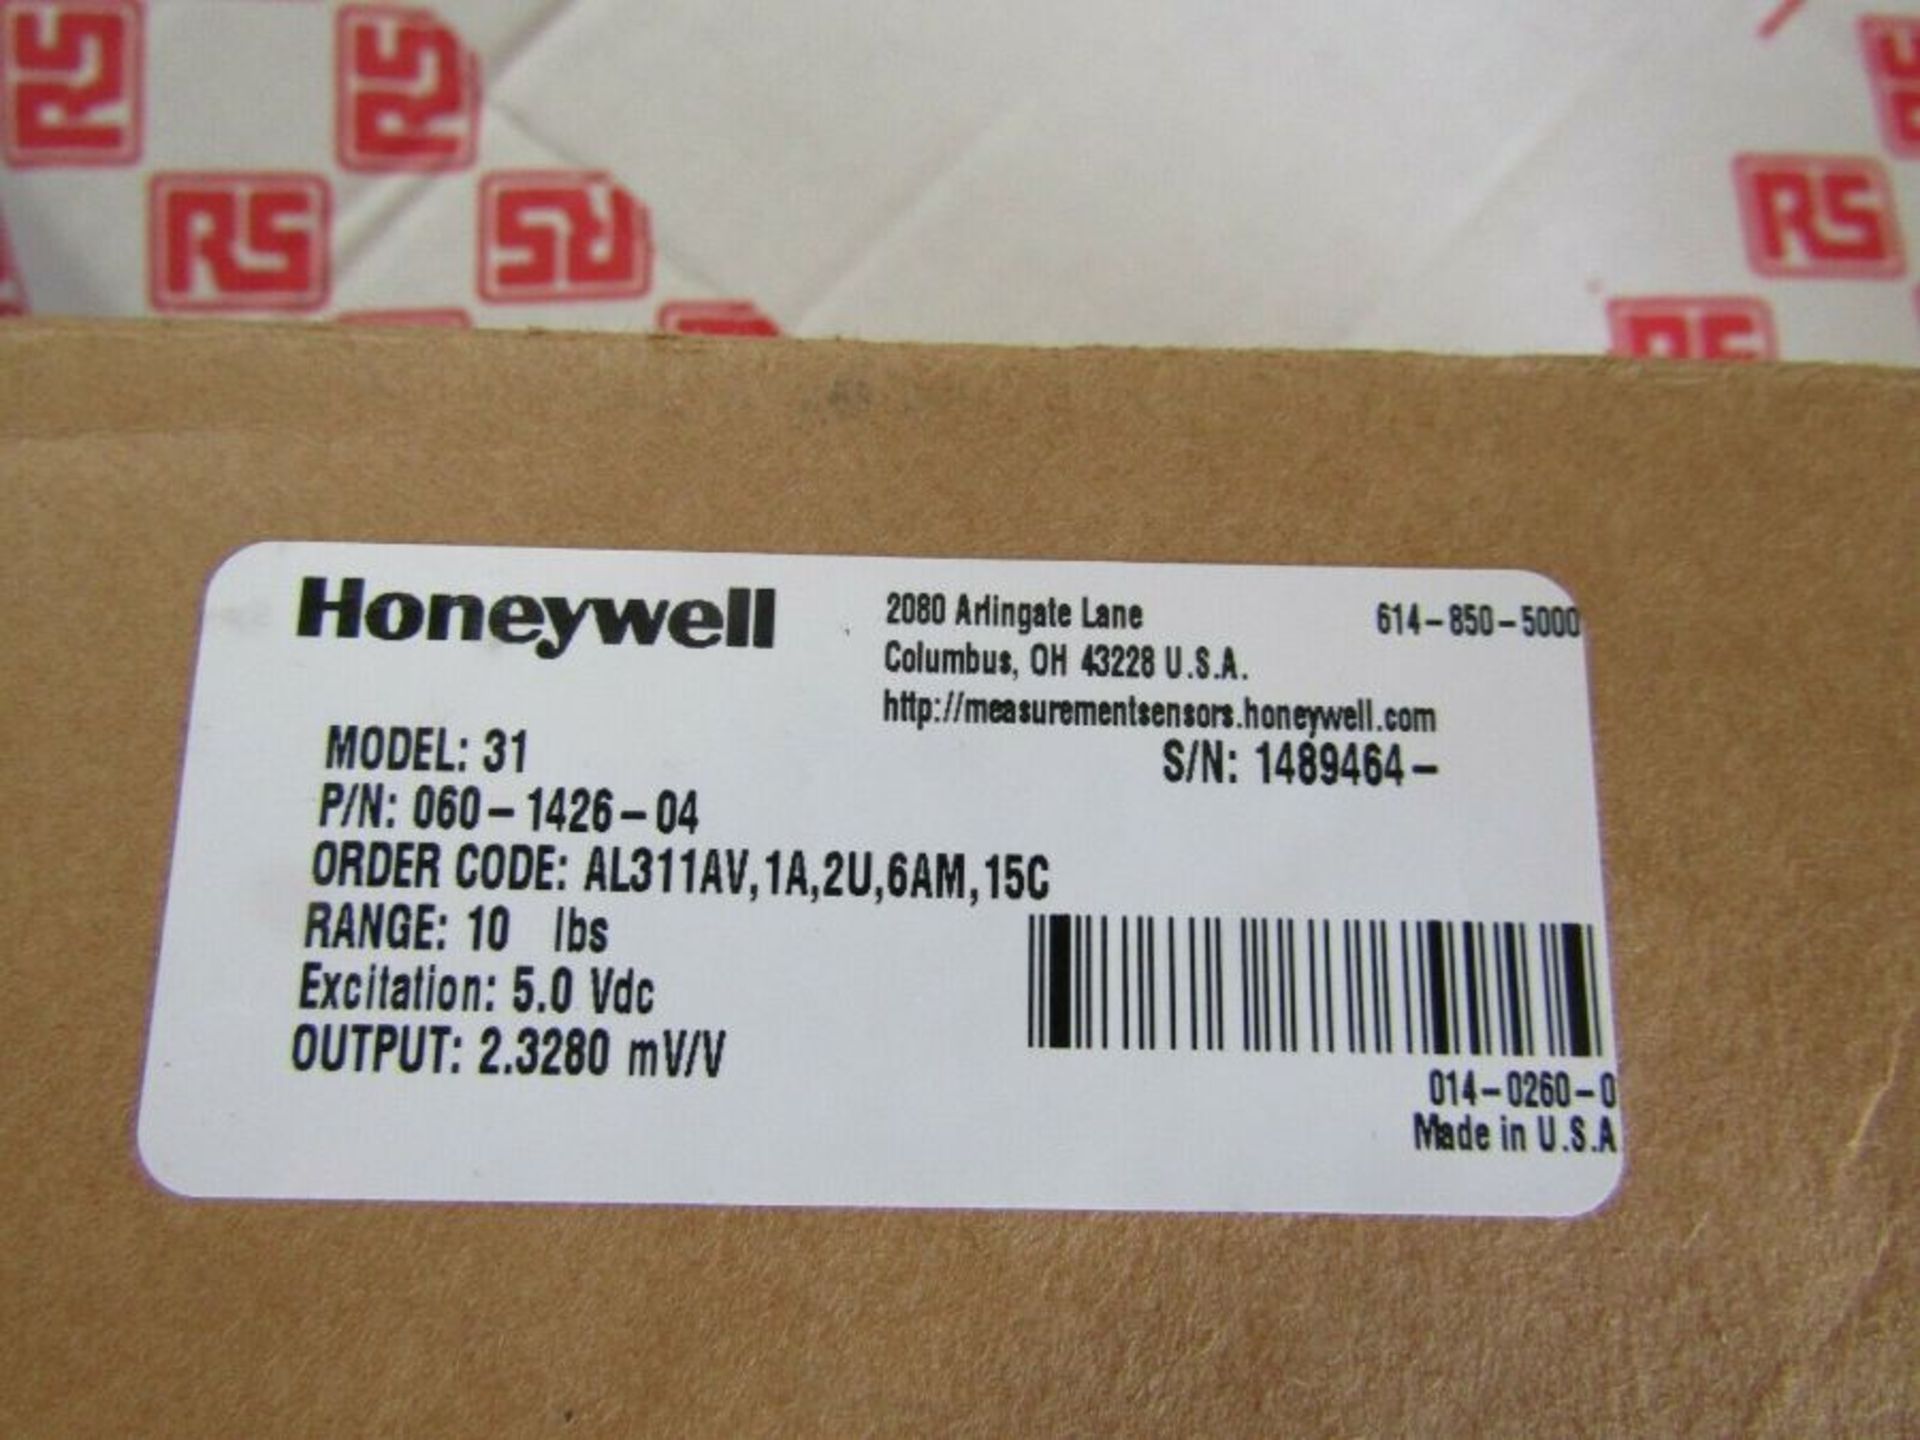 Honeywell Compression & Tension Load Cell Max 4.53kg, 5Vdc - Model 31 A2 8214061 - Image 2 of 2